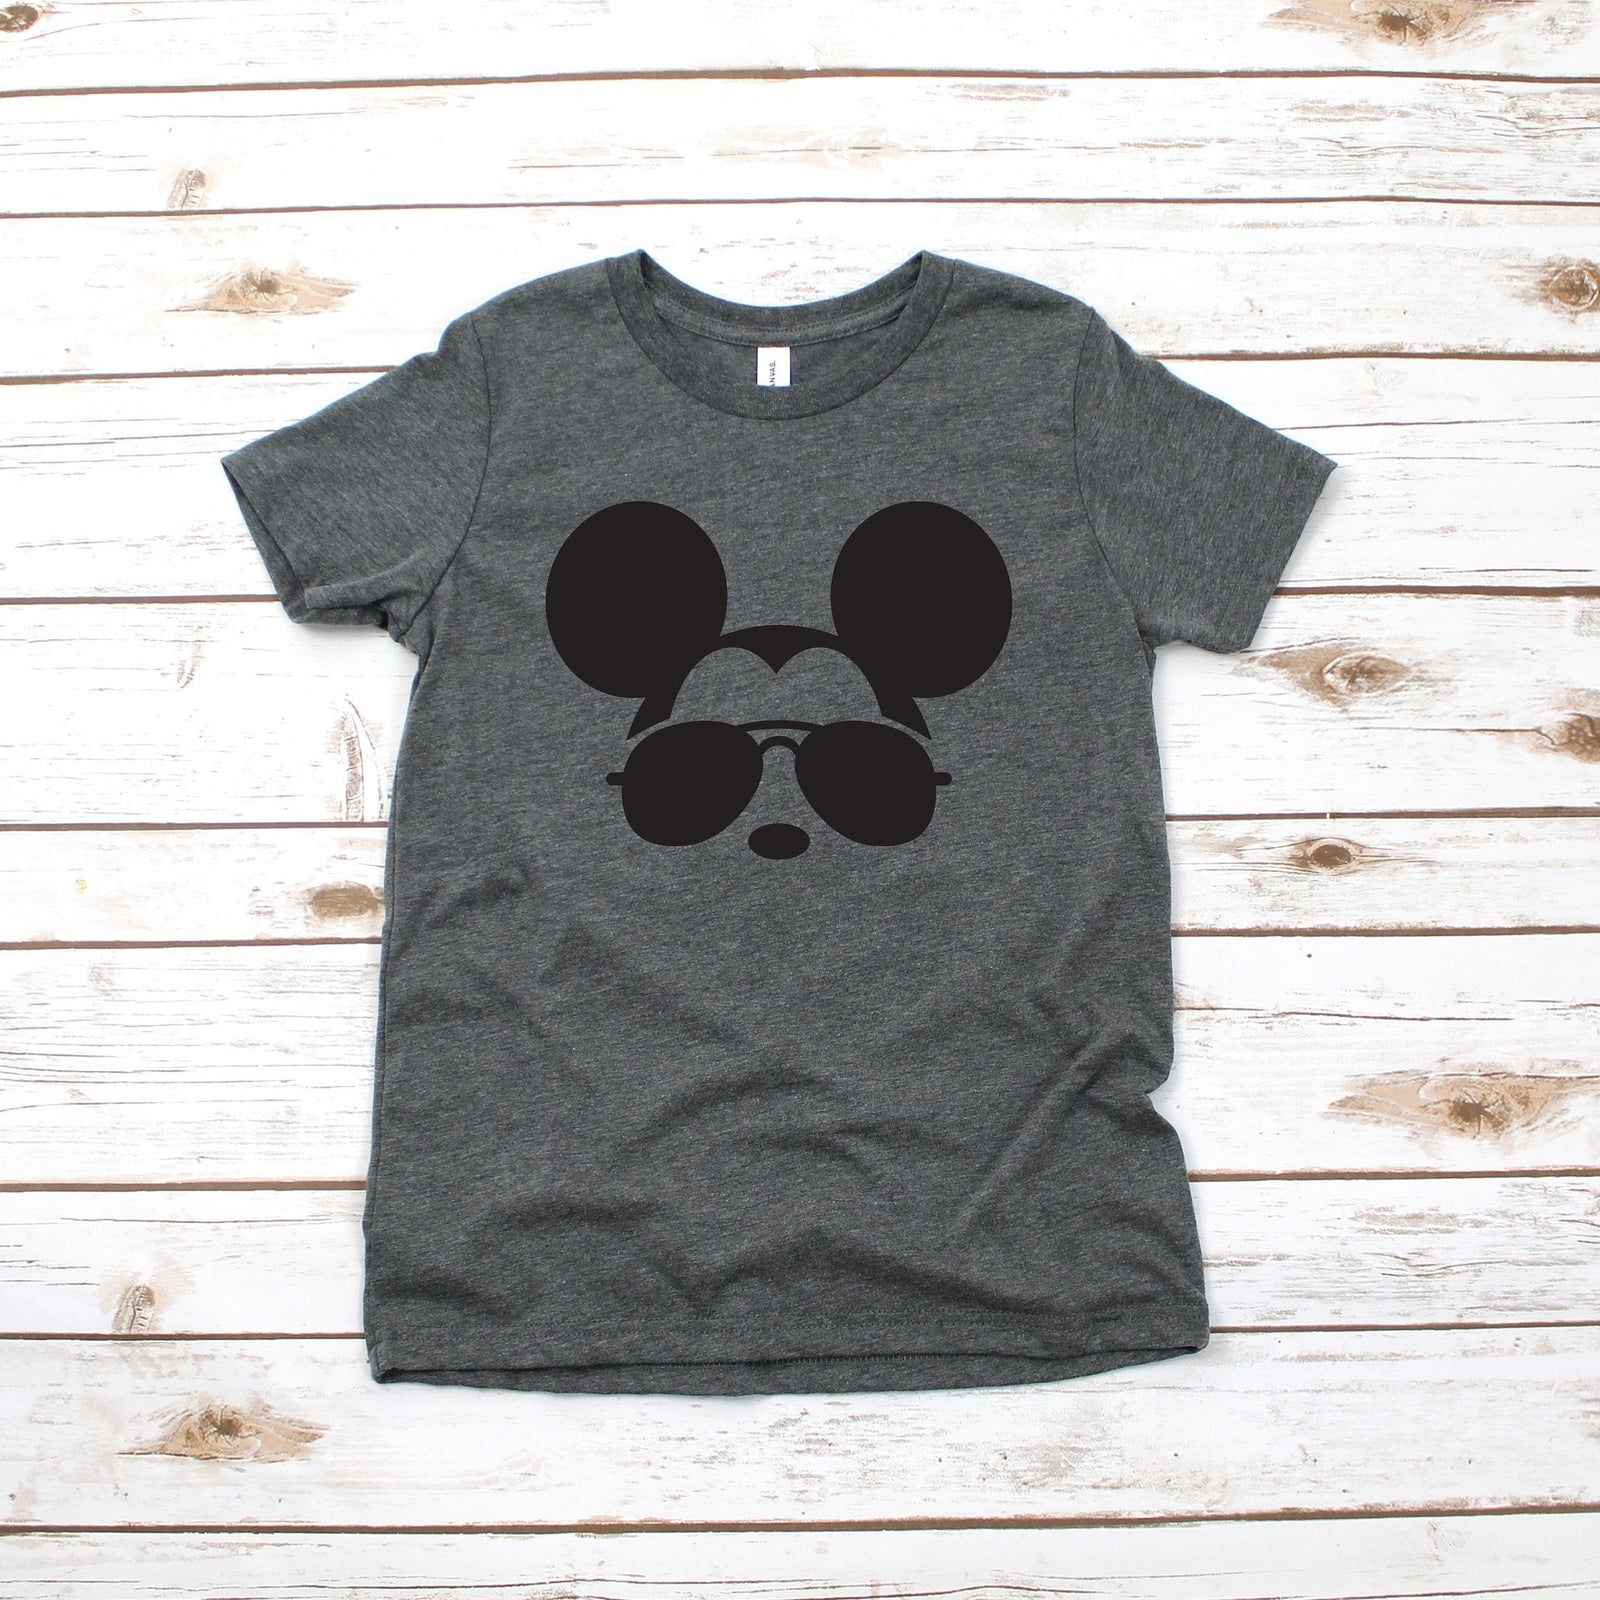 Custom Mickey Mouse Name Shirt - Infant Toddler Youth Mickey Shirt - Disney Kids Shirts - Cool Mickey Sunglasses T Shirt - Personalized Name